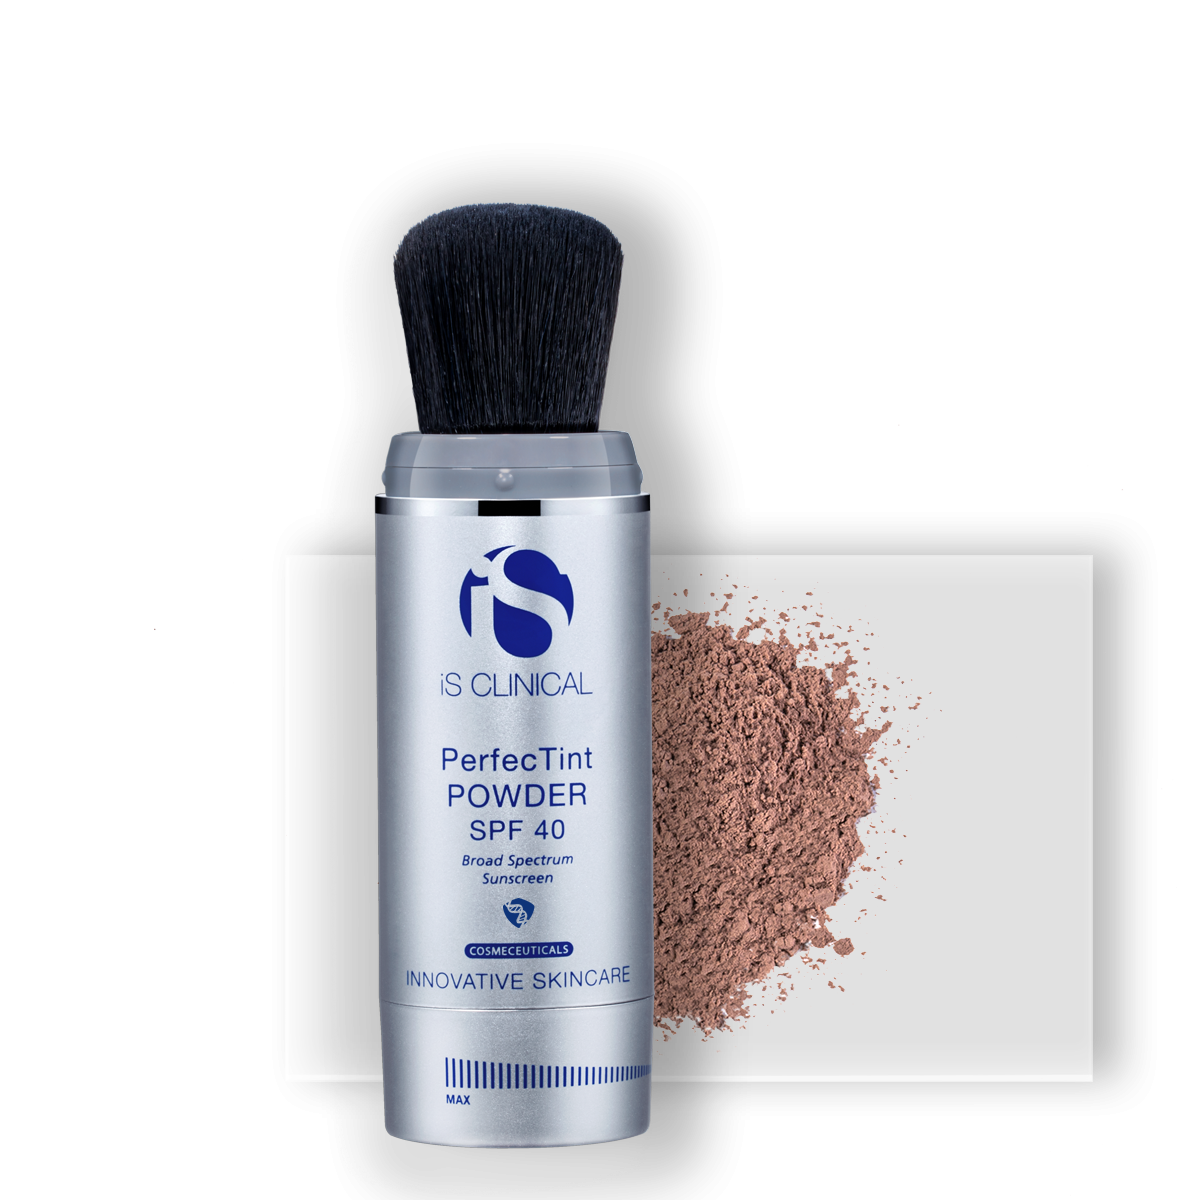 iS Clinical PerfecTint Powder SPF 40 - a cosmetic powder that provides silky smooth broad spectrum coverage to help protect skin against the visible signs of photoaging while minimizing the appearance of pores and absorbing surface oil to create a flawless finish. Shown in deep.